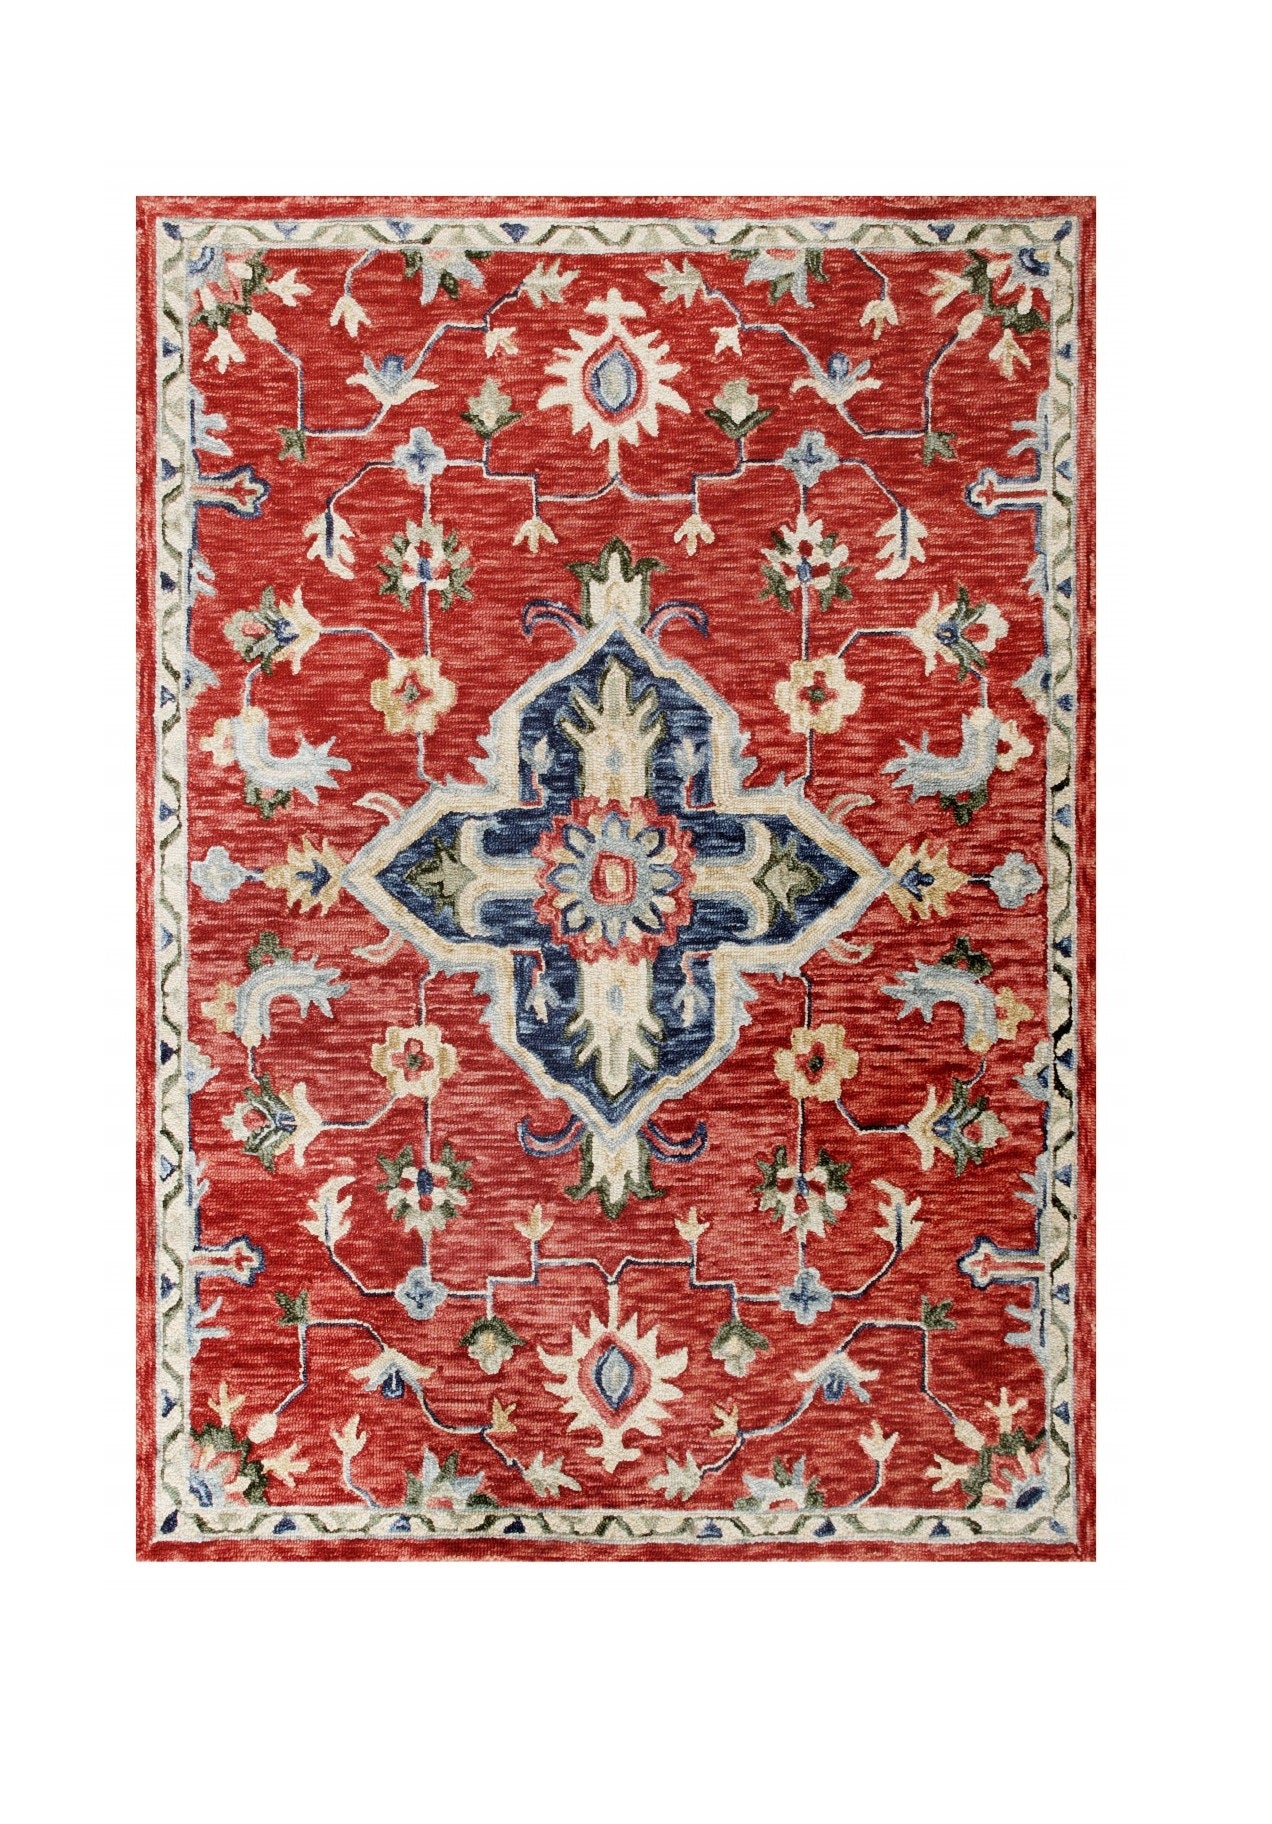 5’ X 7’ Red And Blue Floral Medallion Area Rug